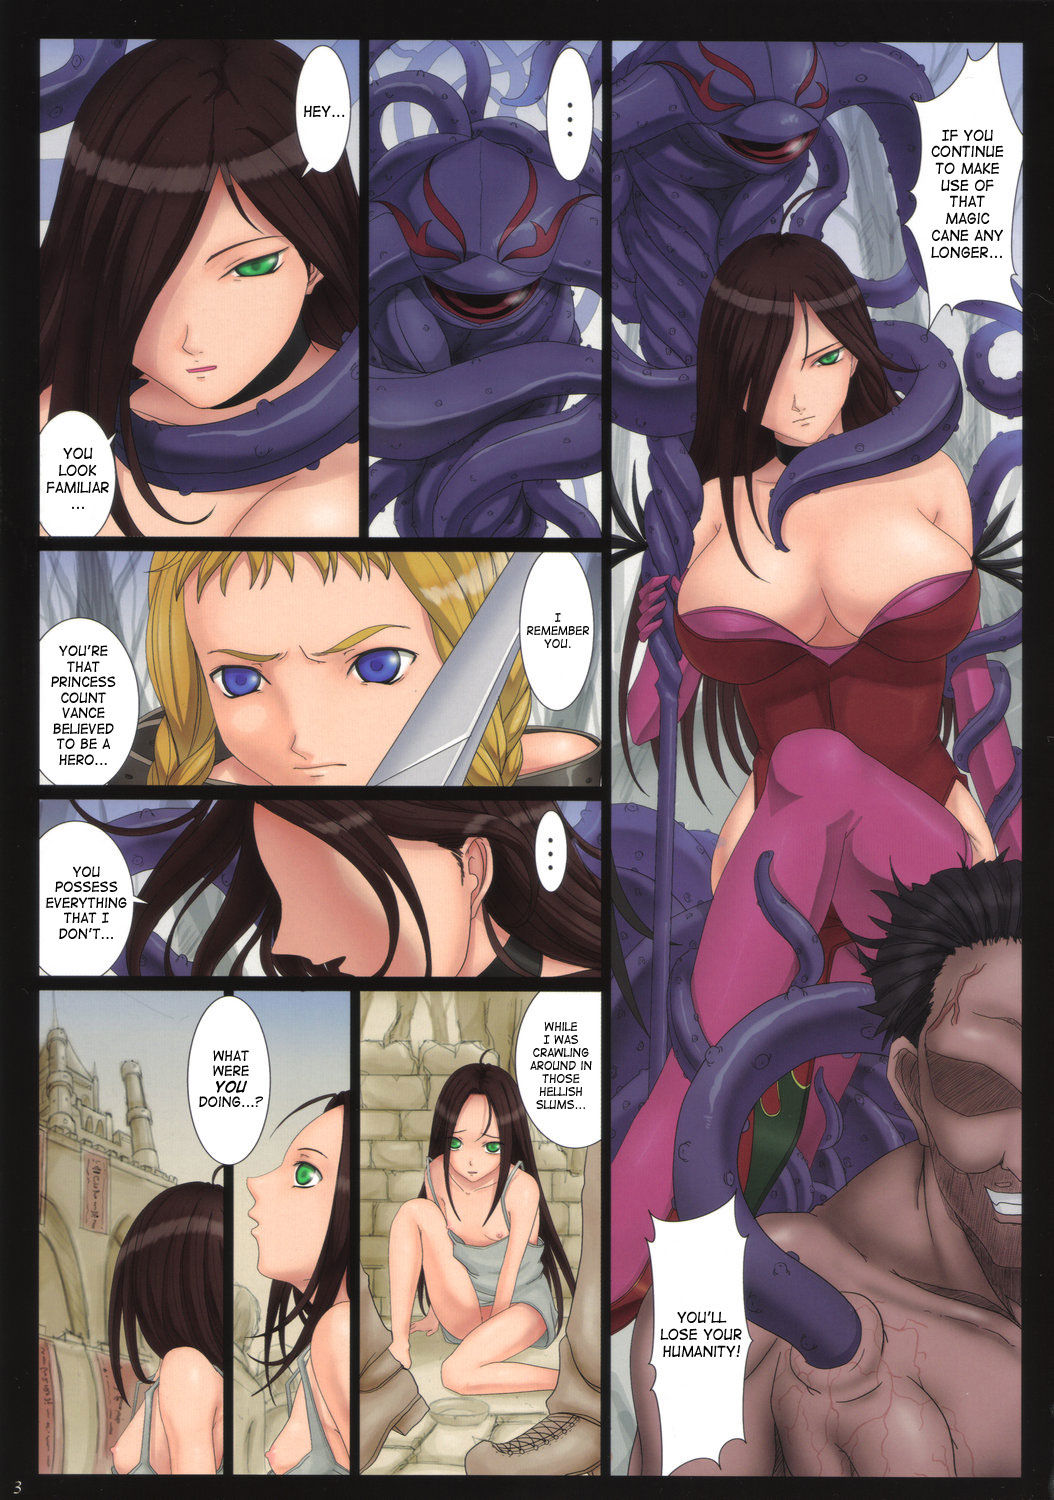 Tounyuu Fighting Big Tits Girl (Queens Blade) by orico page 4